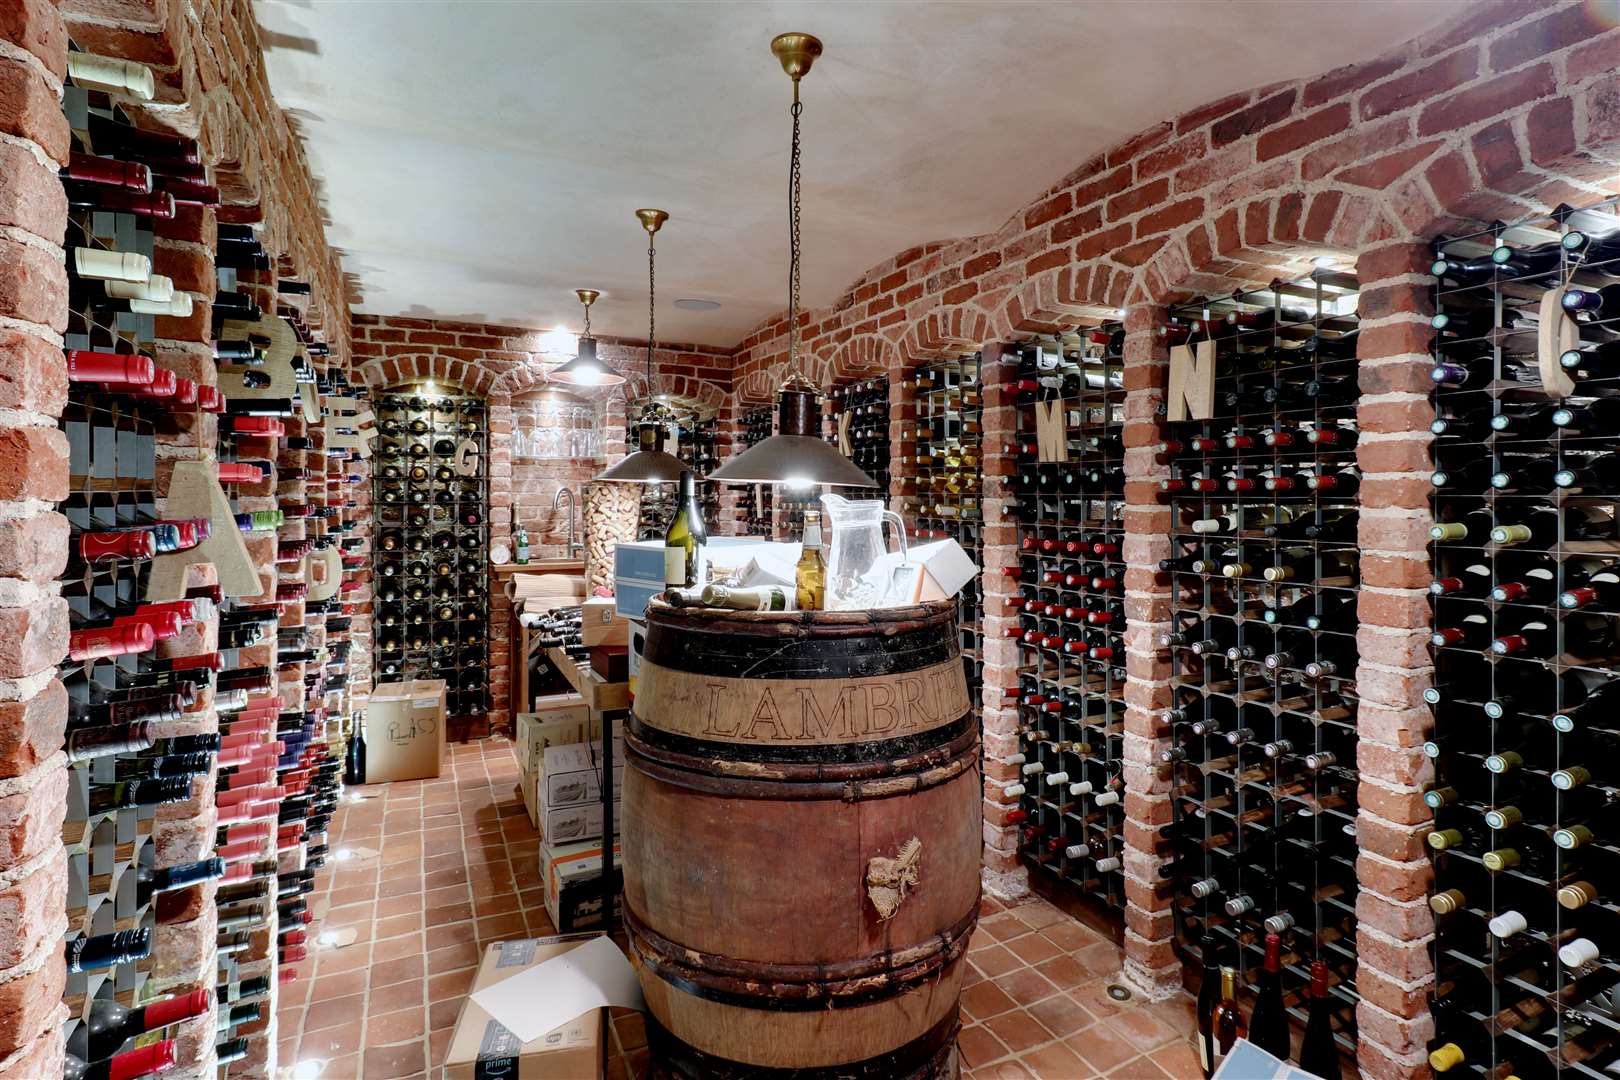 Impress your guests with the incredible wine cellar. Picture: Savills